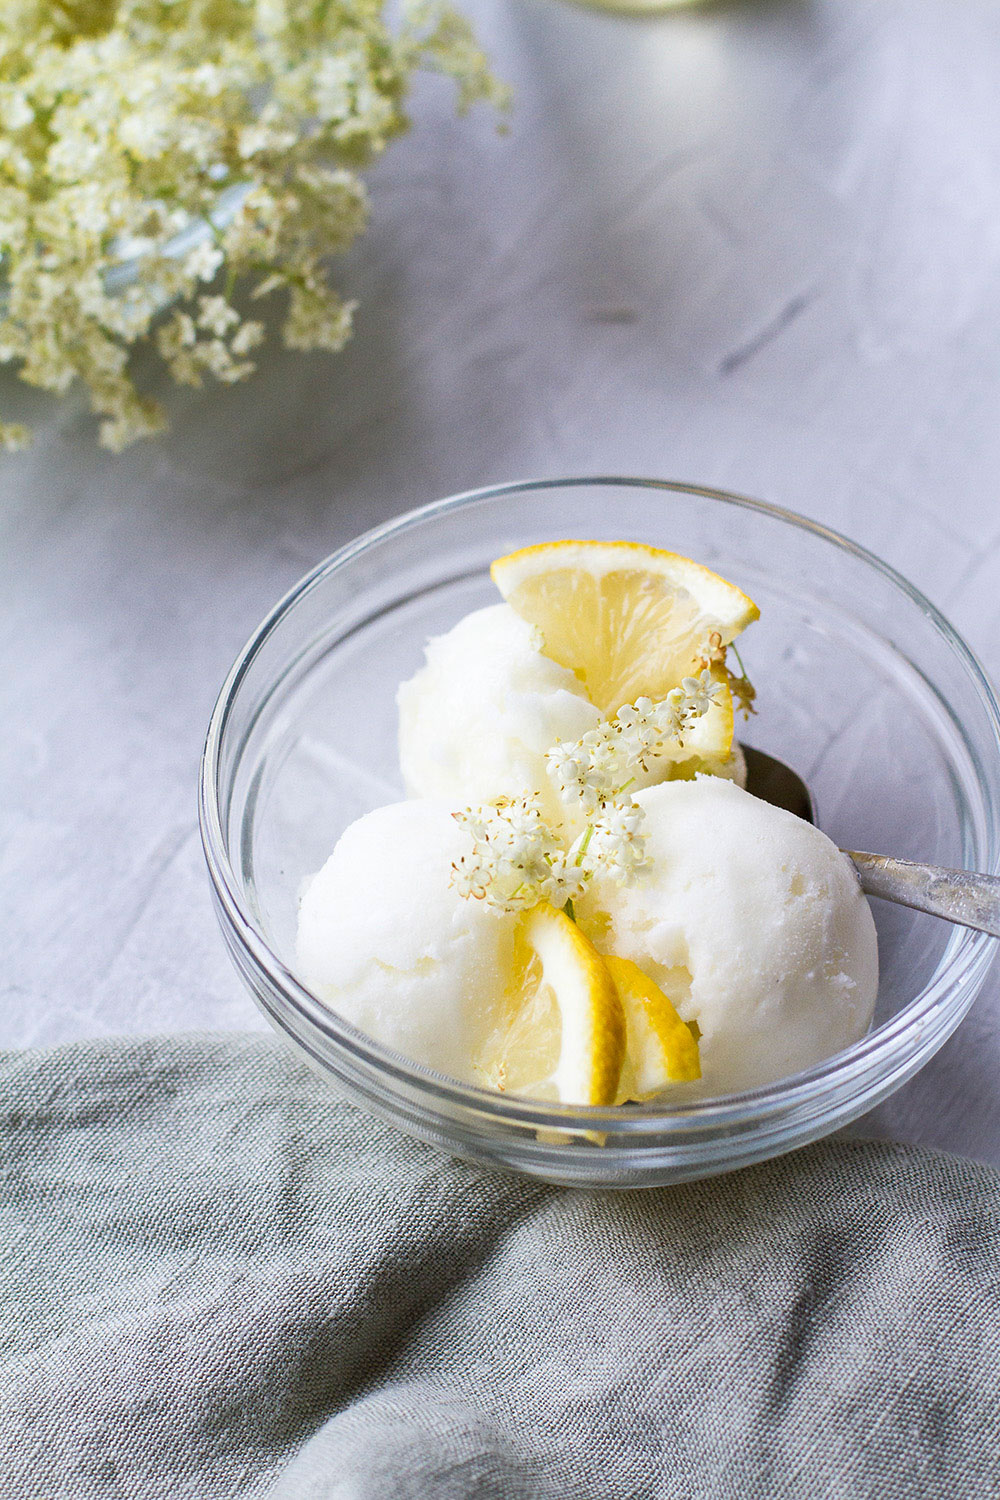 A serving of lemon sorbet in a clear glass bowl.